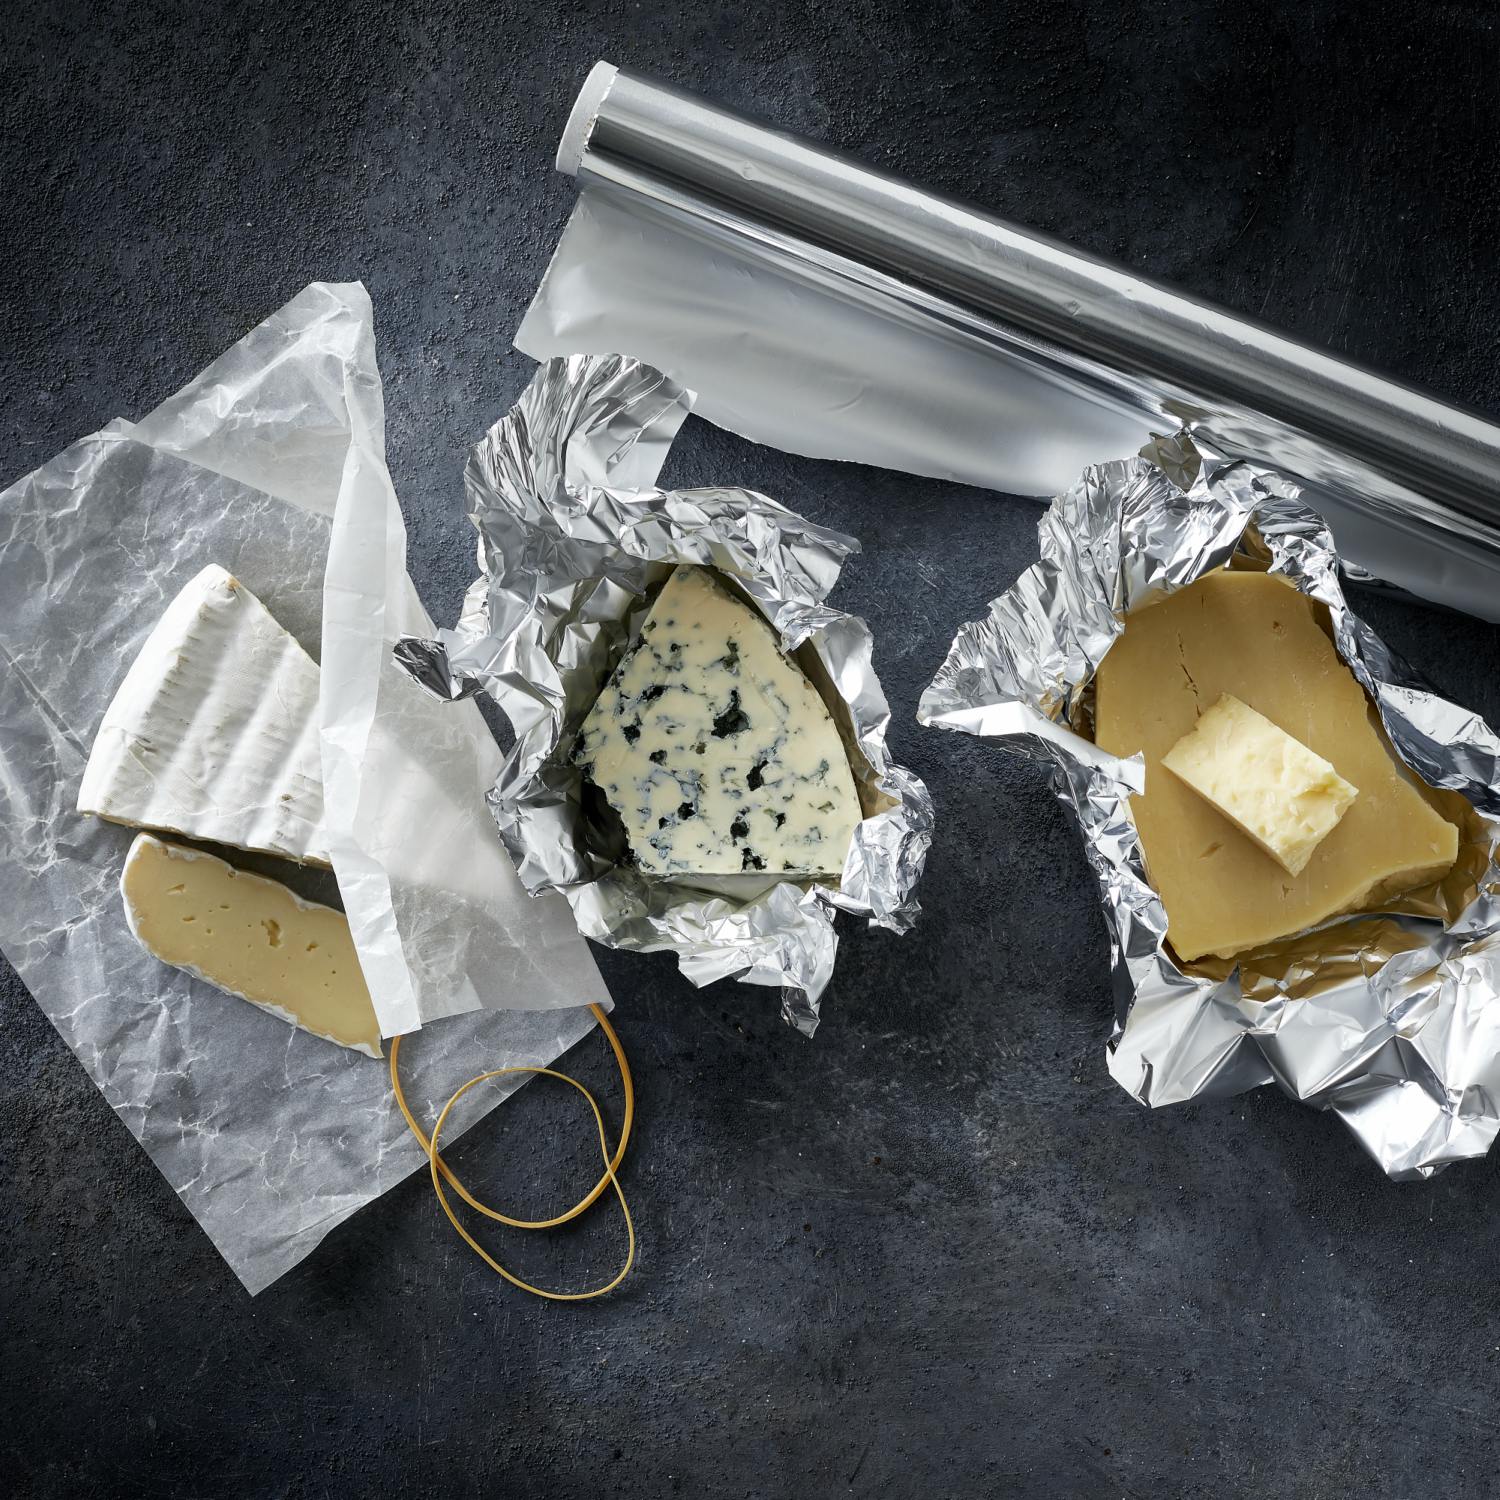 Foil Cheese Wrap for Blue Cheese